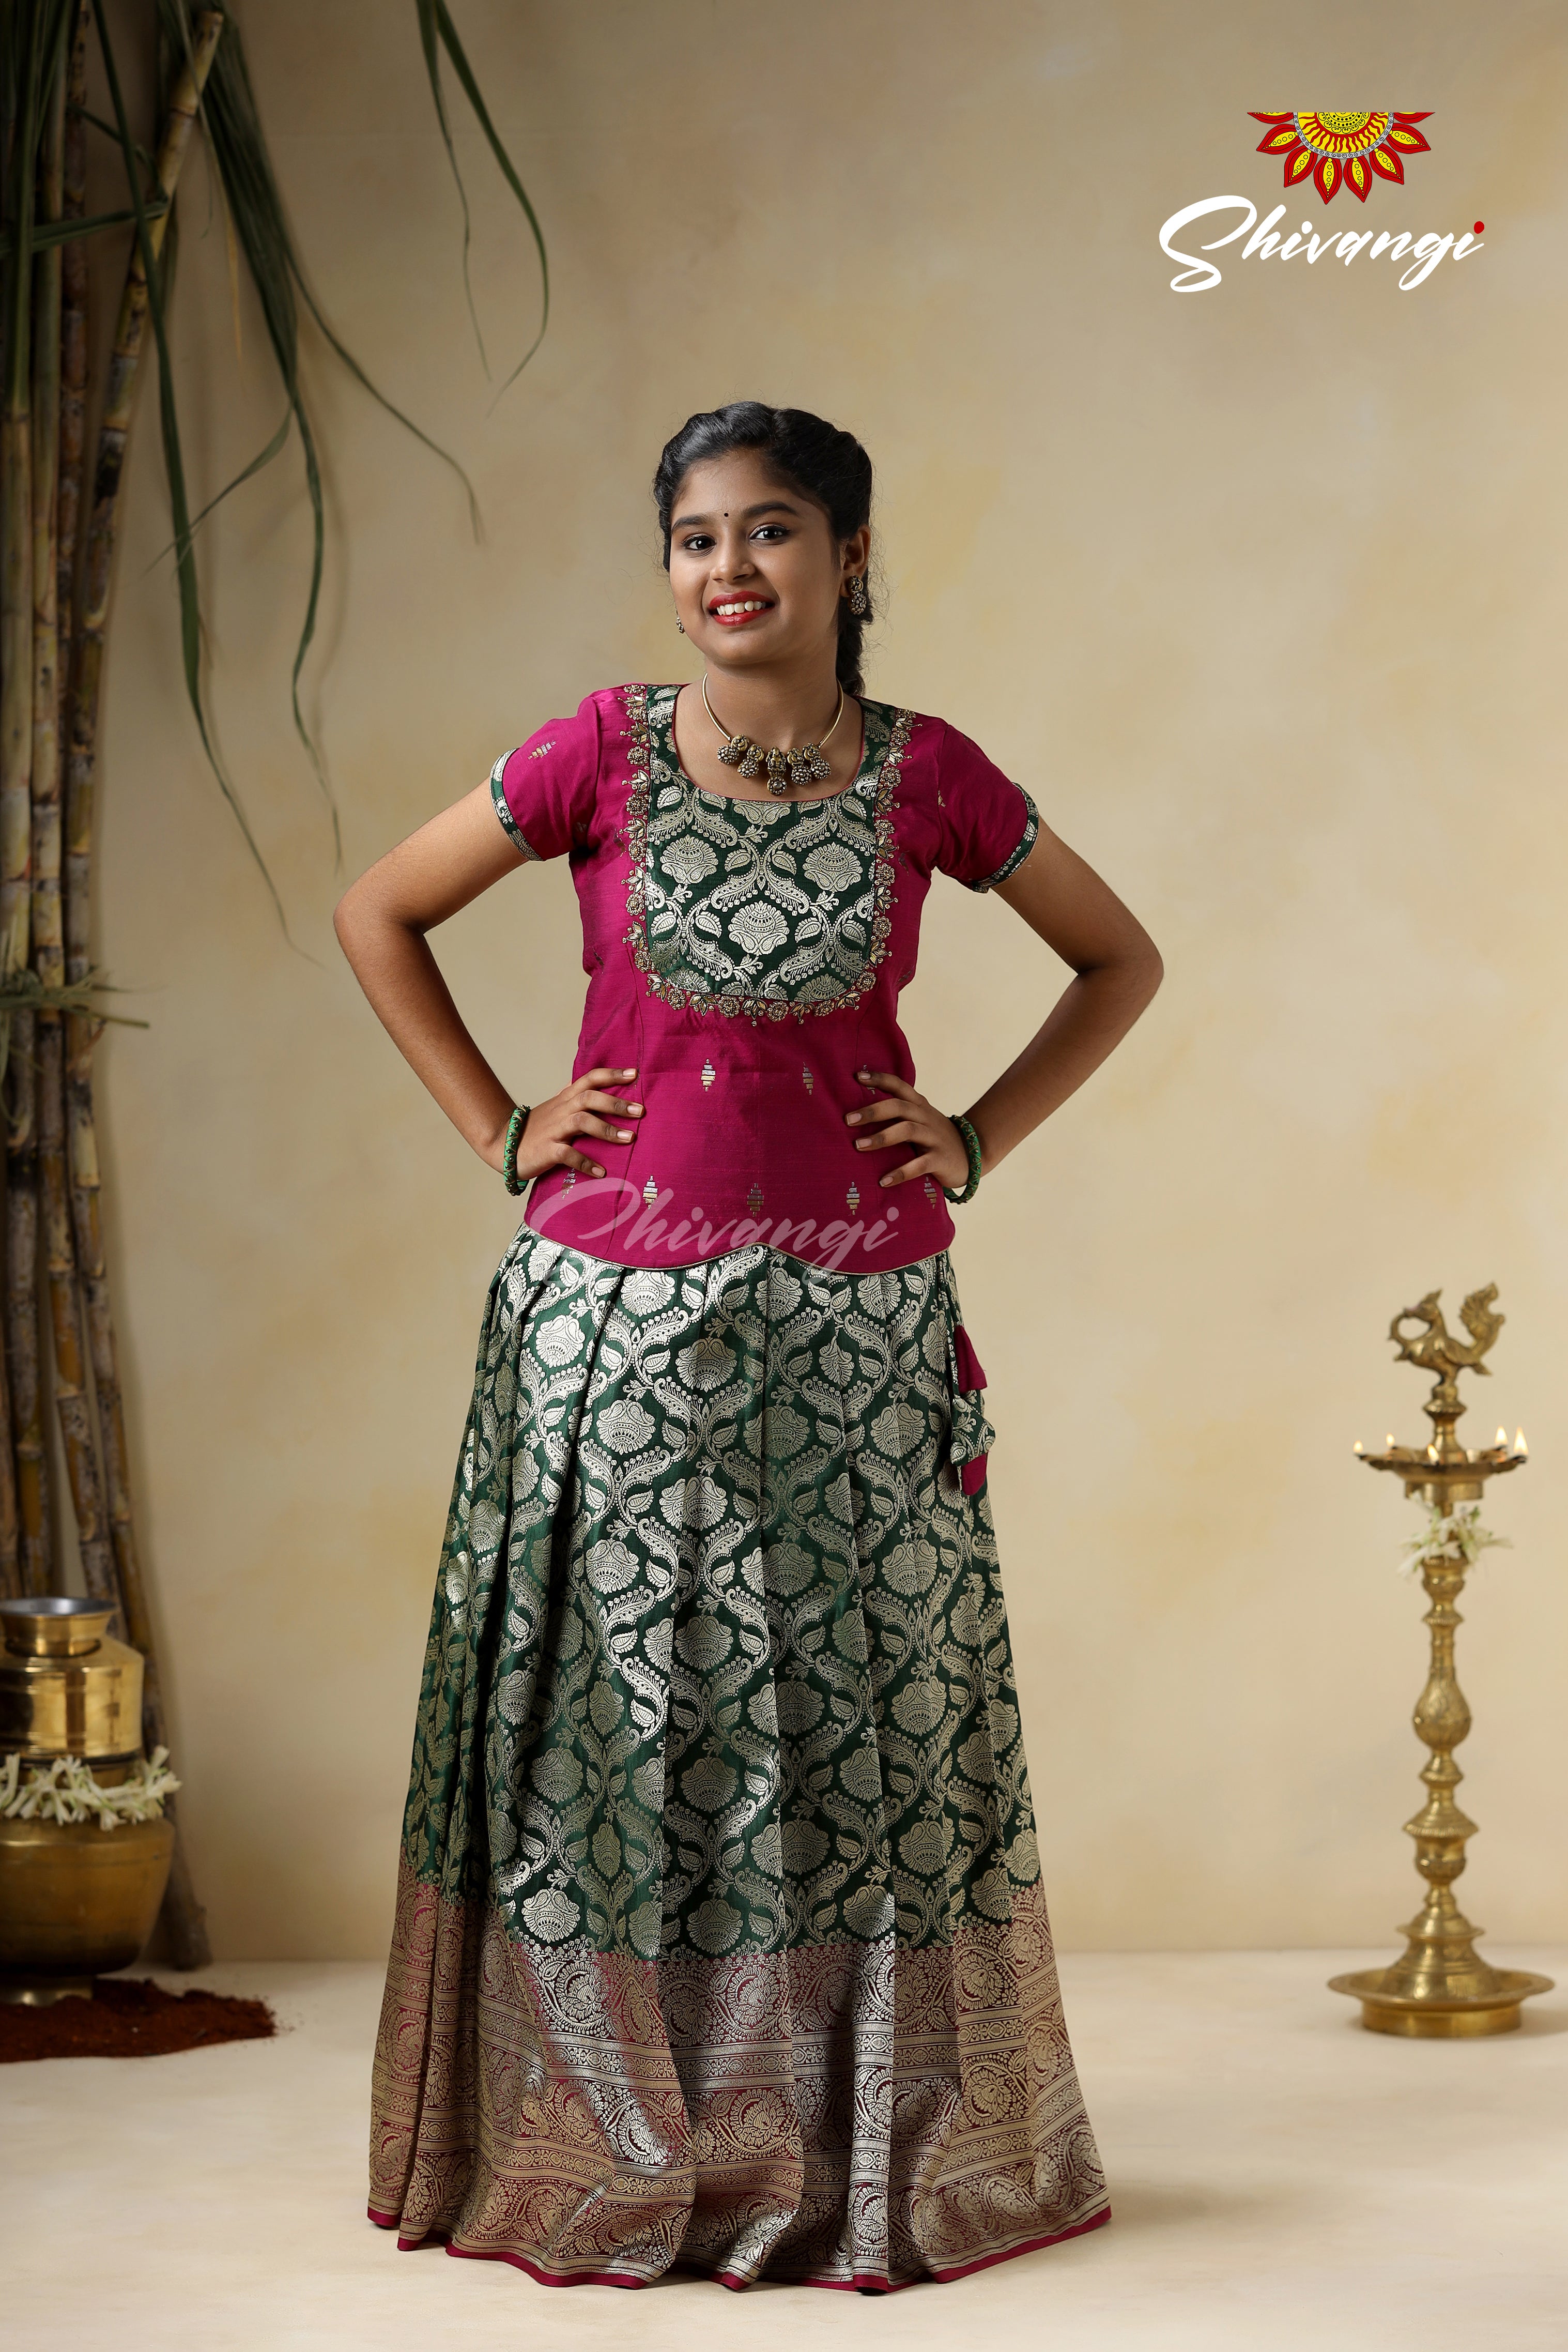 Long Dresses made out of old and Damaged Sarees #LongDresses | Long dress  design, Girls frock design, Long gown design